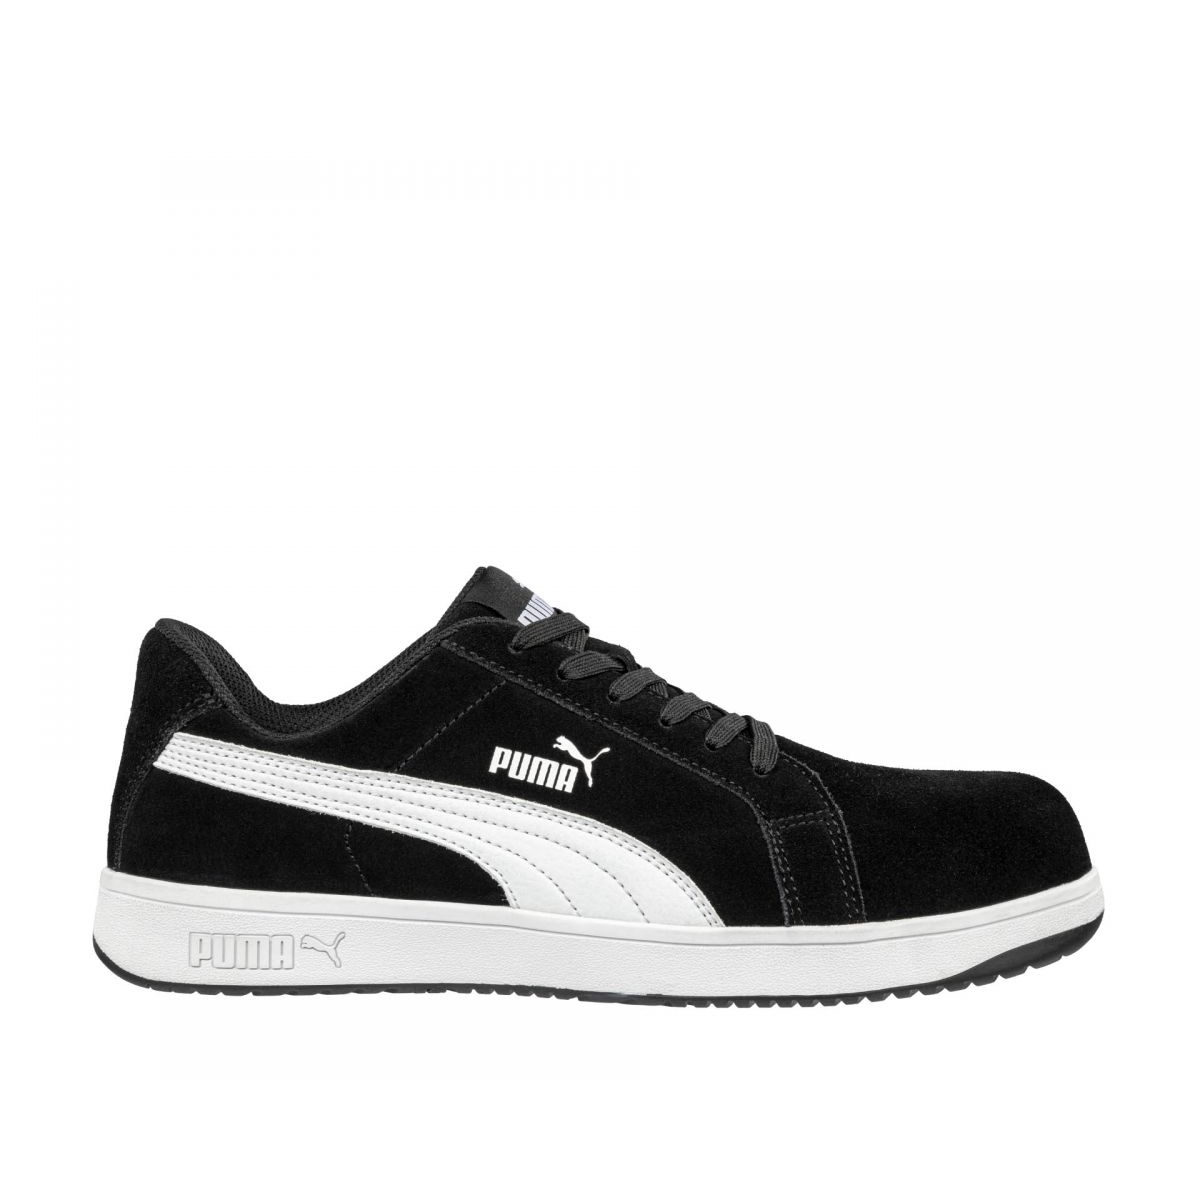 PUMA Safety Men's Iconic Low Composite Toe EH Work Shoes Black Suede - 640015 ONE SIZE BLACK - BLACK, 10